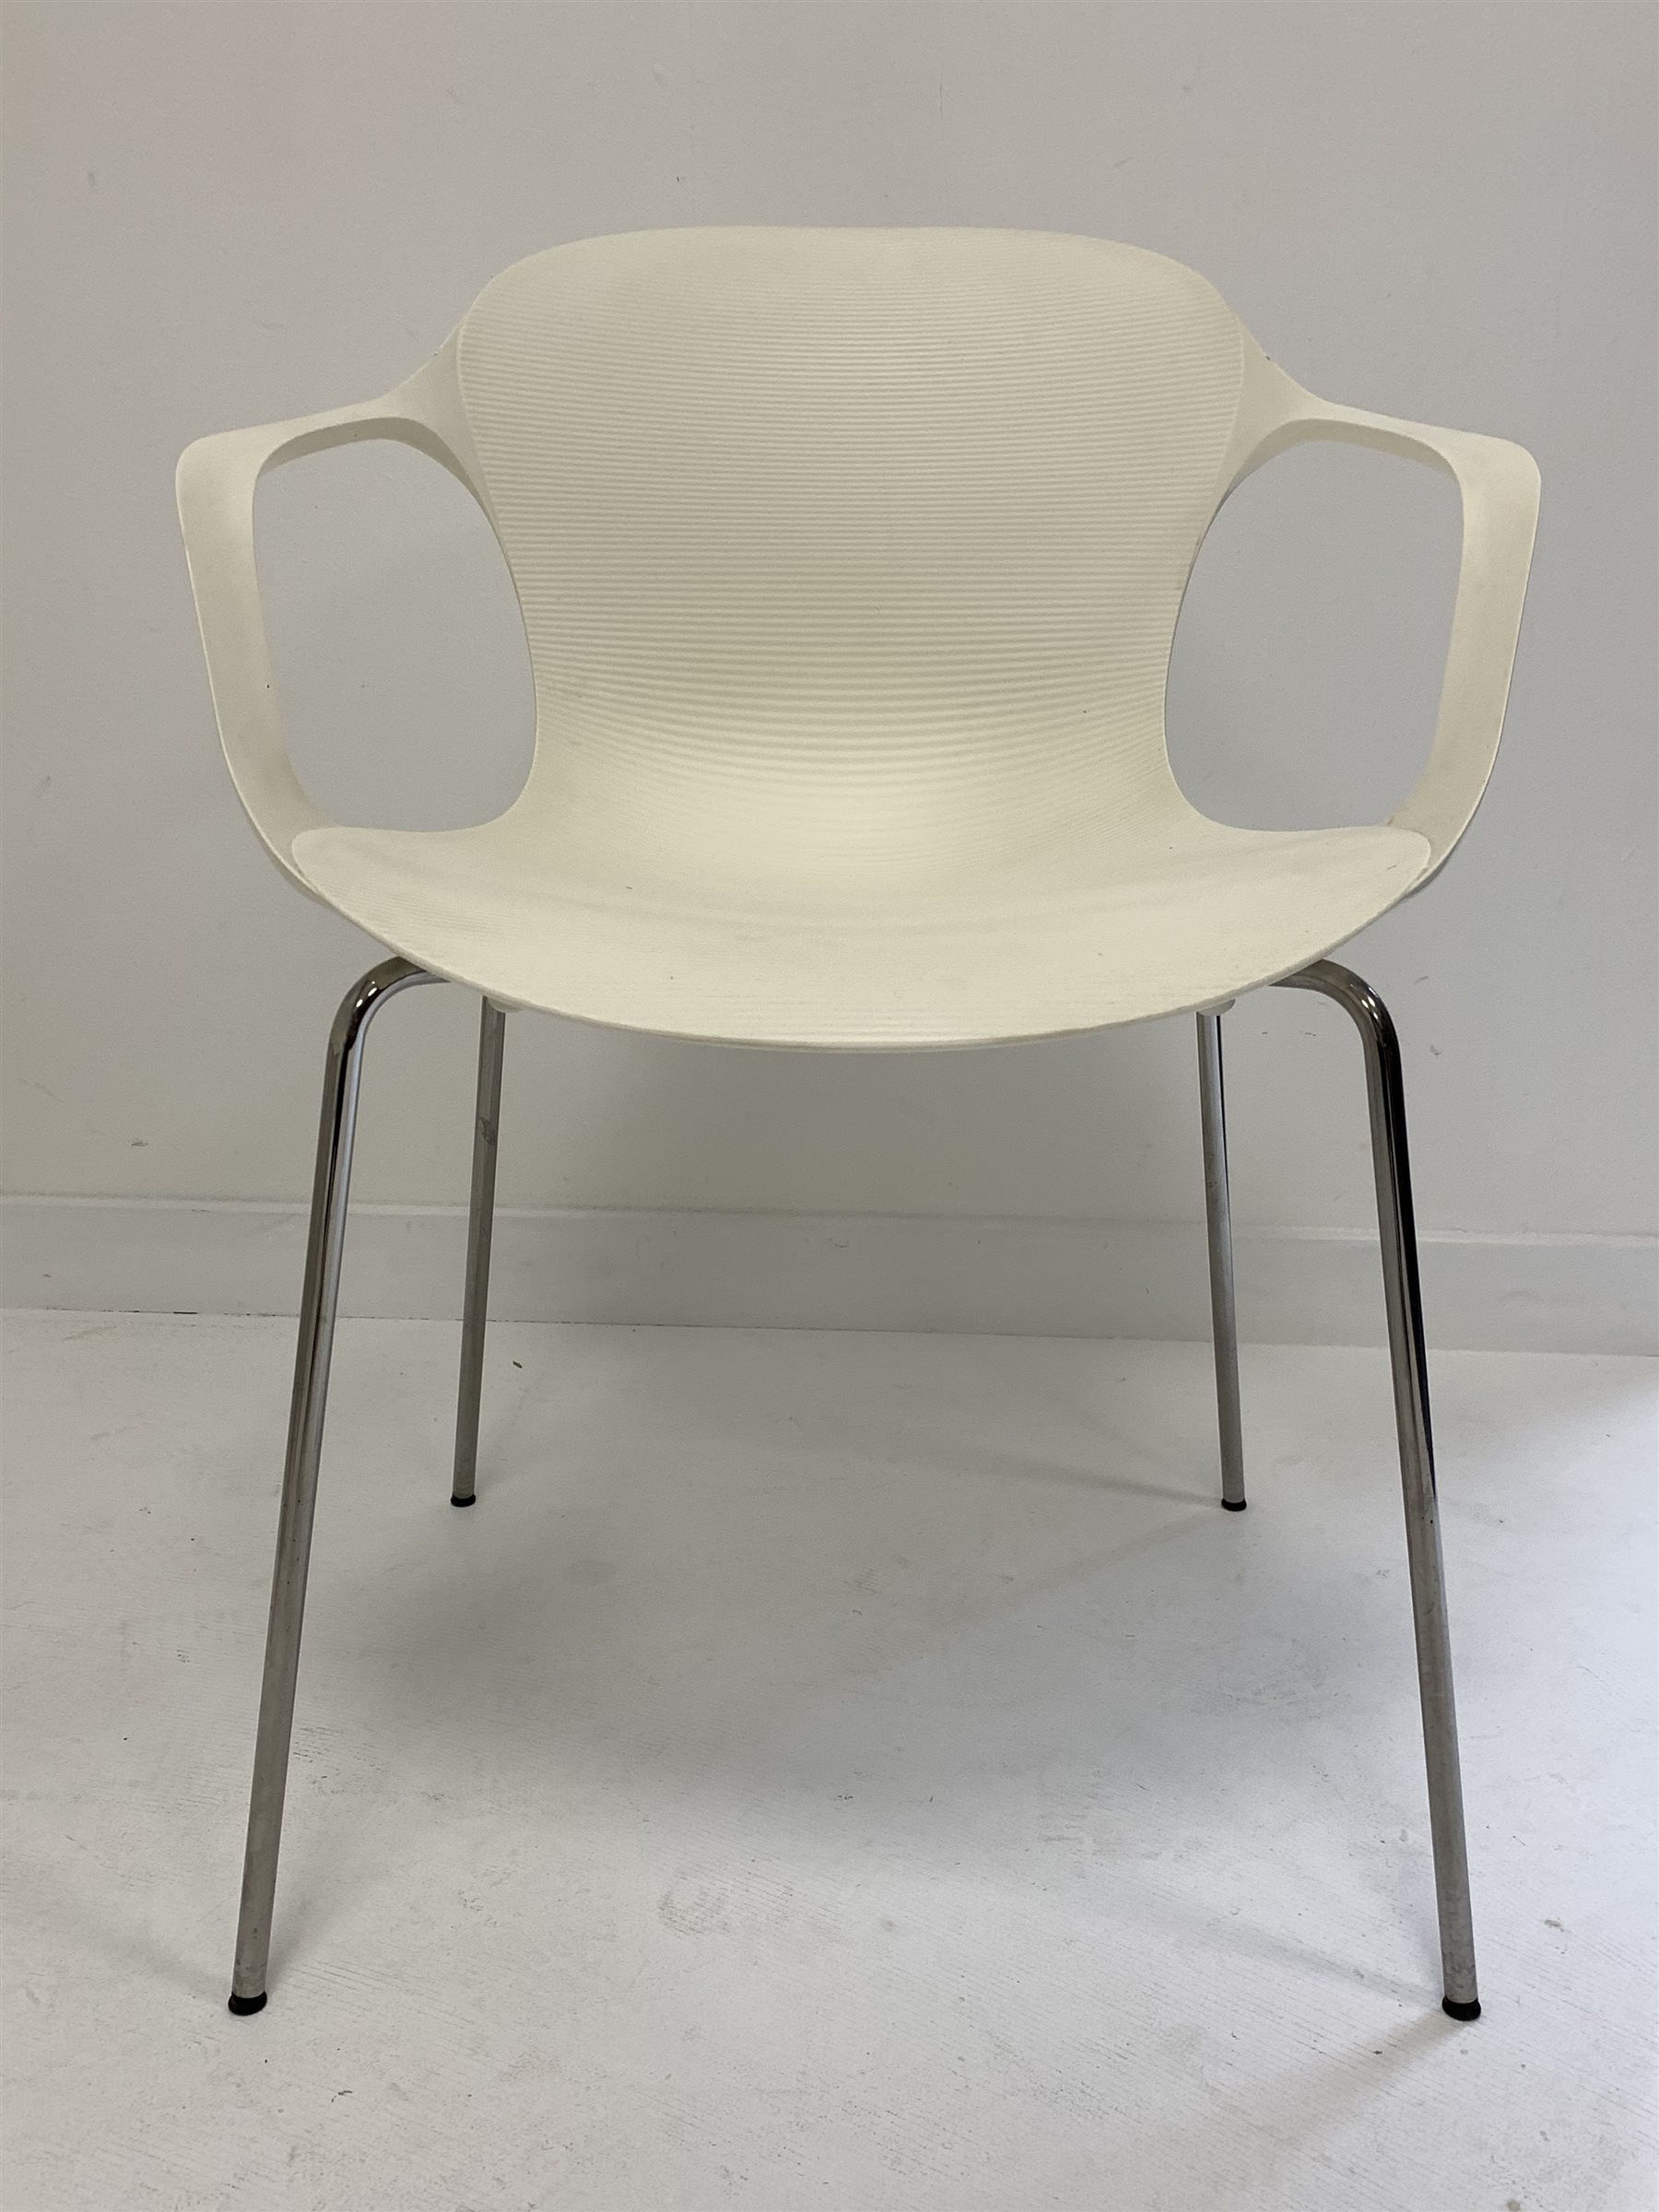 Arne Jacobson et al. for Fritz Hansen - Contemporary 'Super Elliptical' dining table with white lam - Image 5 of 6